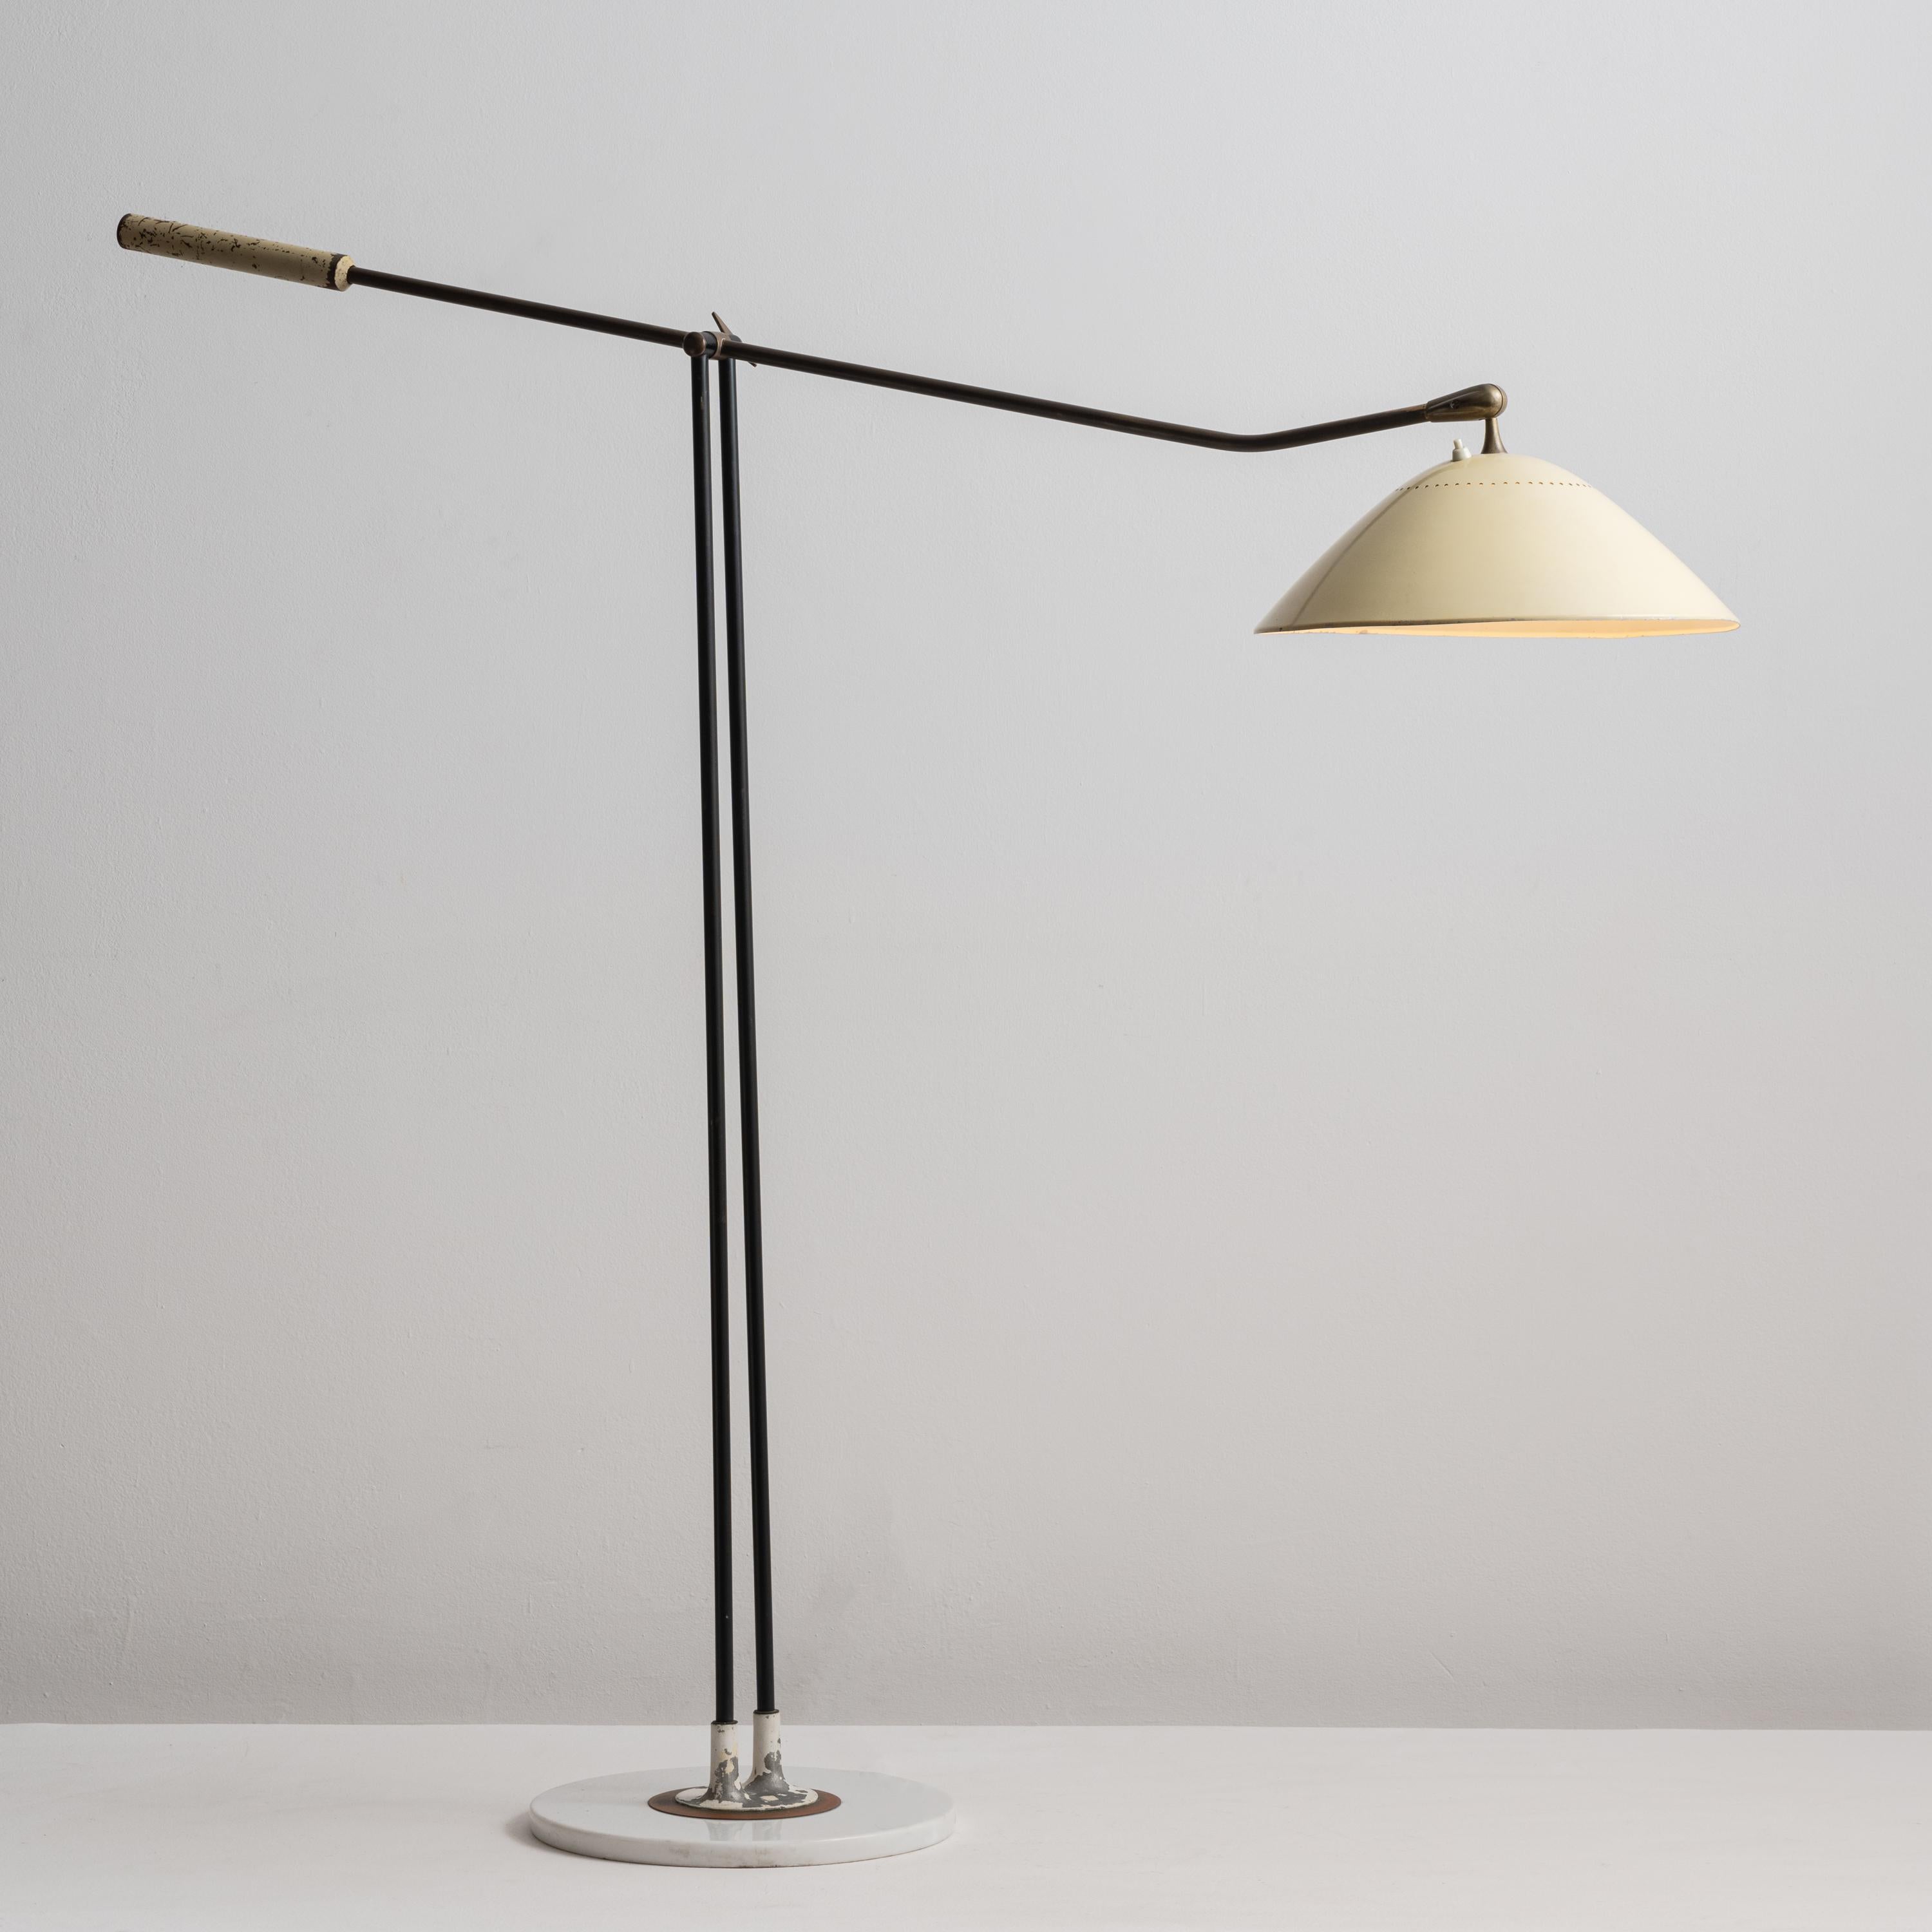 Rare Floor Lamp by Stilnovo. Designed and manufactured in Italy, circa 1950's. Patinated brass, enameled metal. U.S. plug. Pivoting/adjustable stem from 52